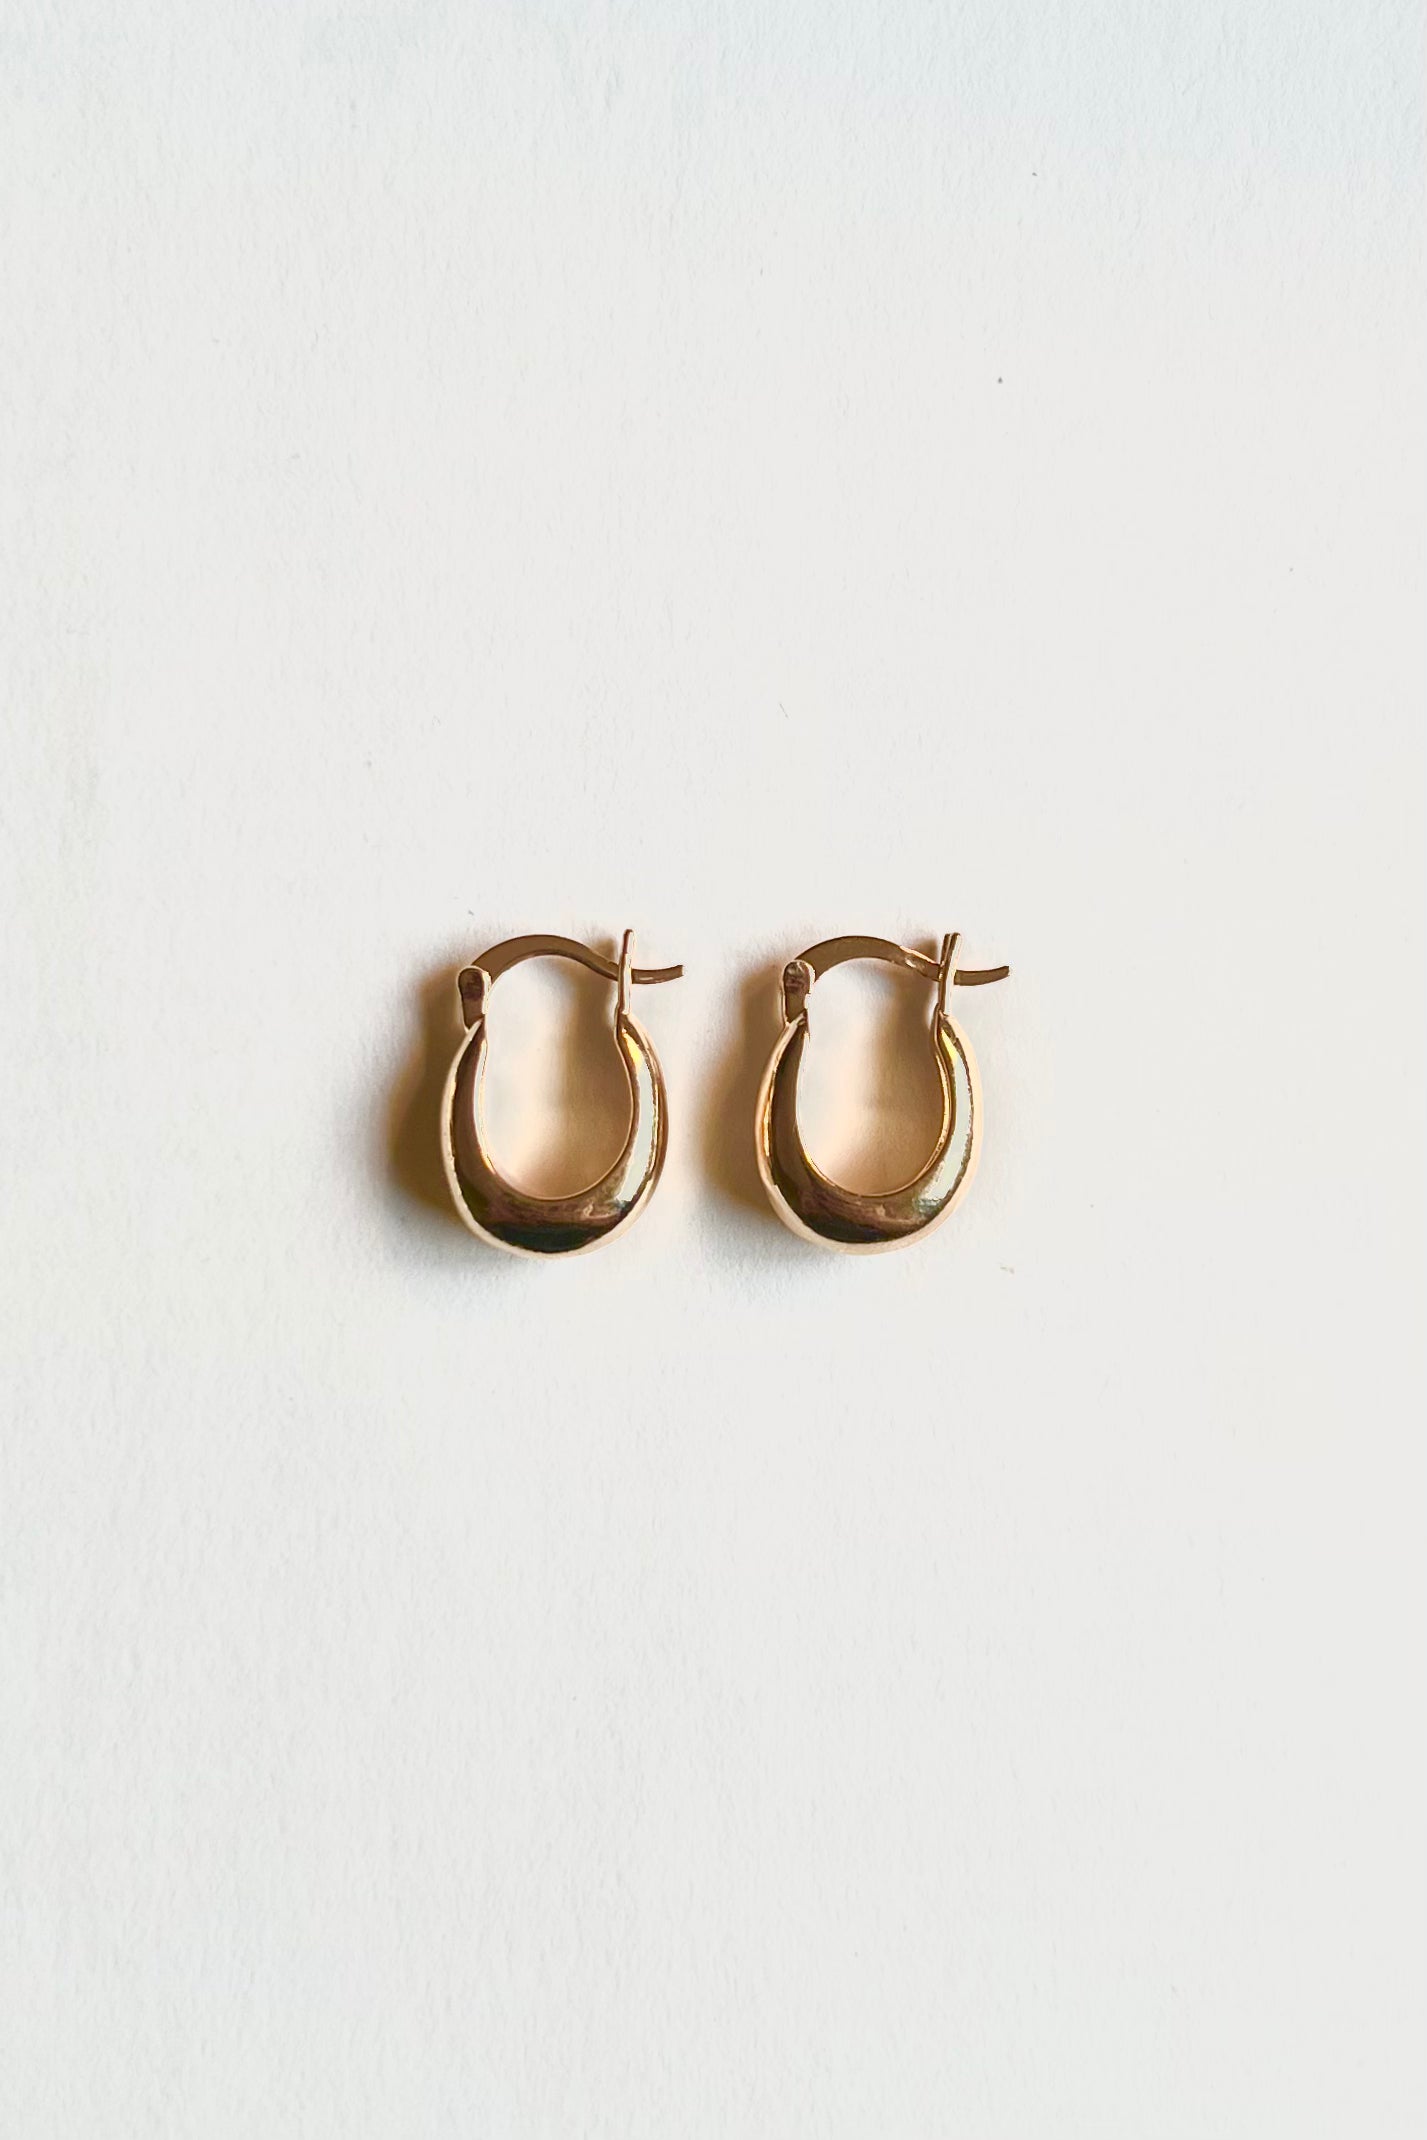 Top view of the olive hoops, photographed on a white background.